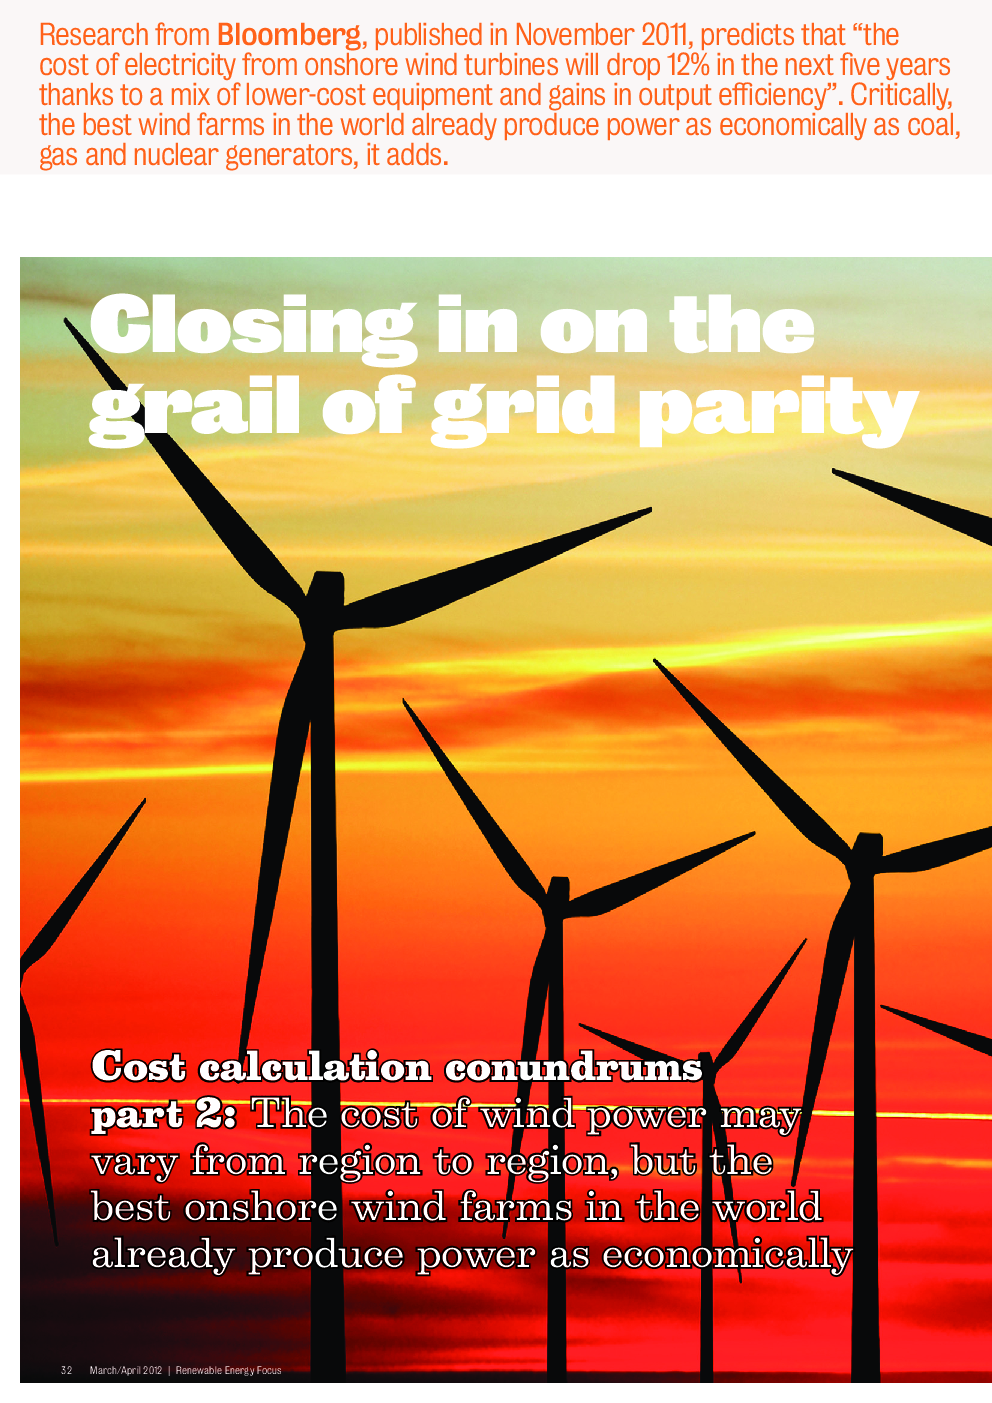 Closing in on the grail of grid parity